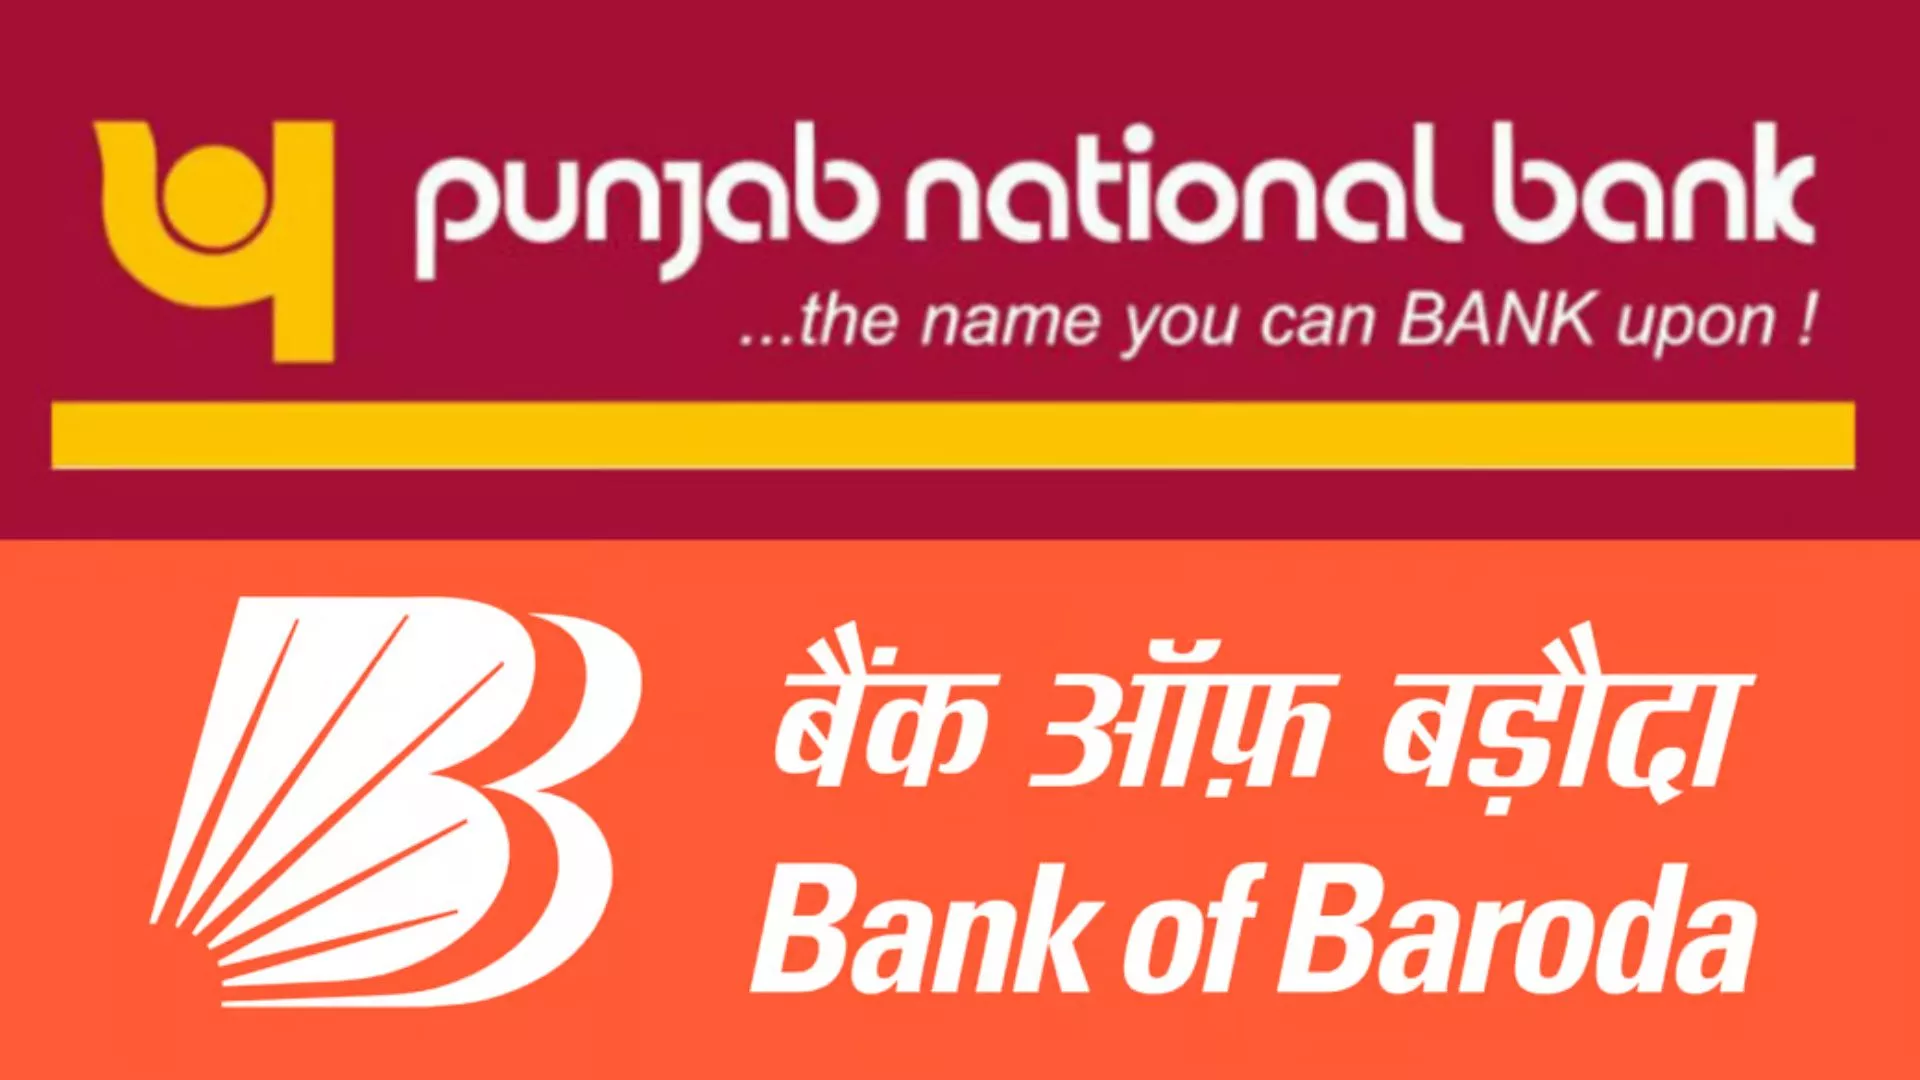 PNB detects fraudulent transactions in Mumbai branch, share price tumbles |  Indiablooms - First Portal on Digital News Management